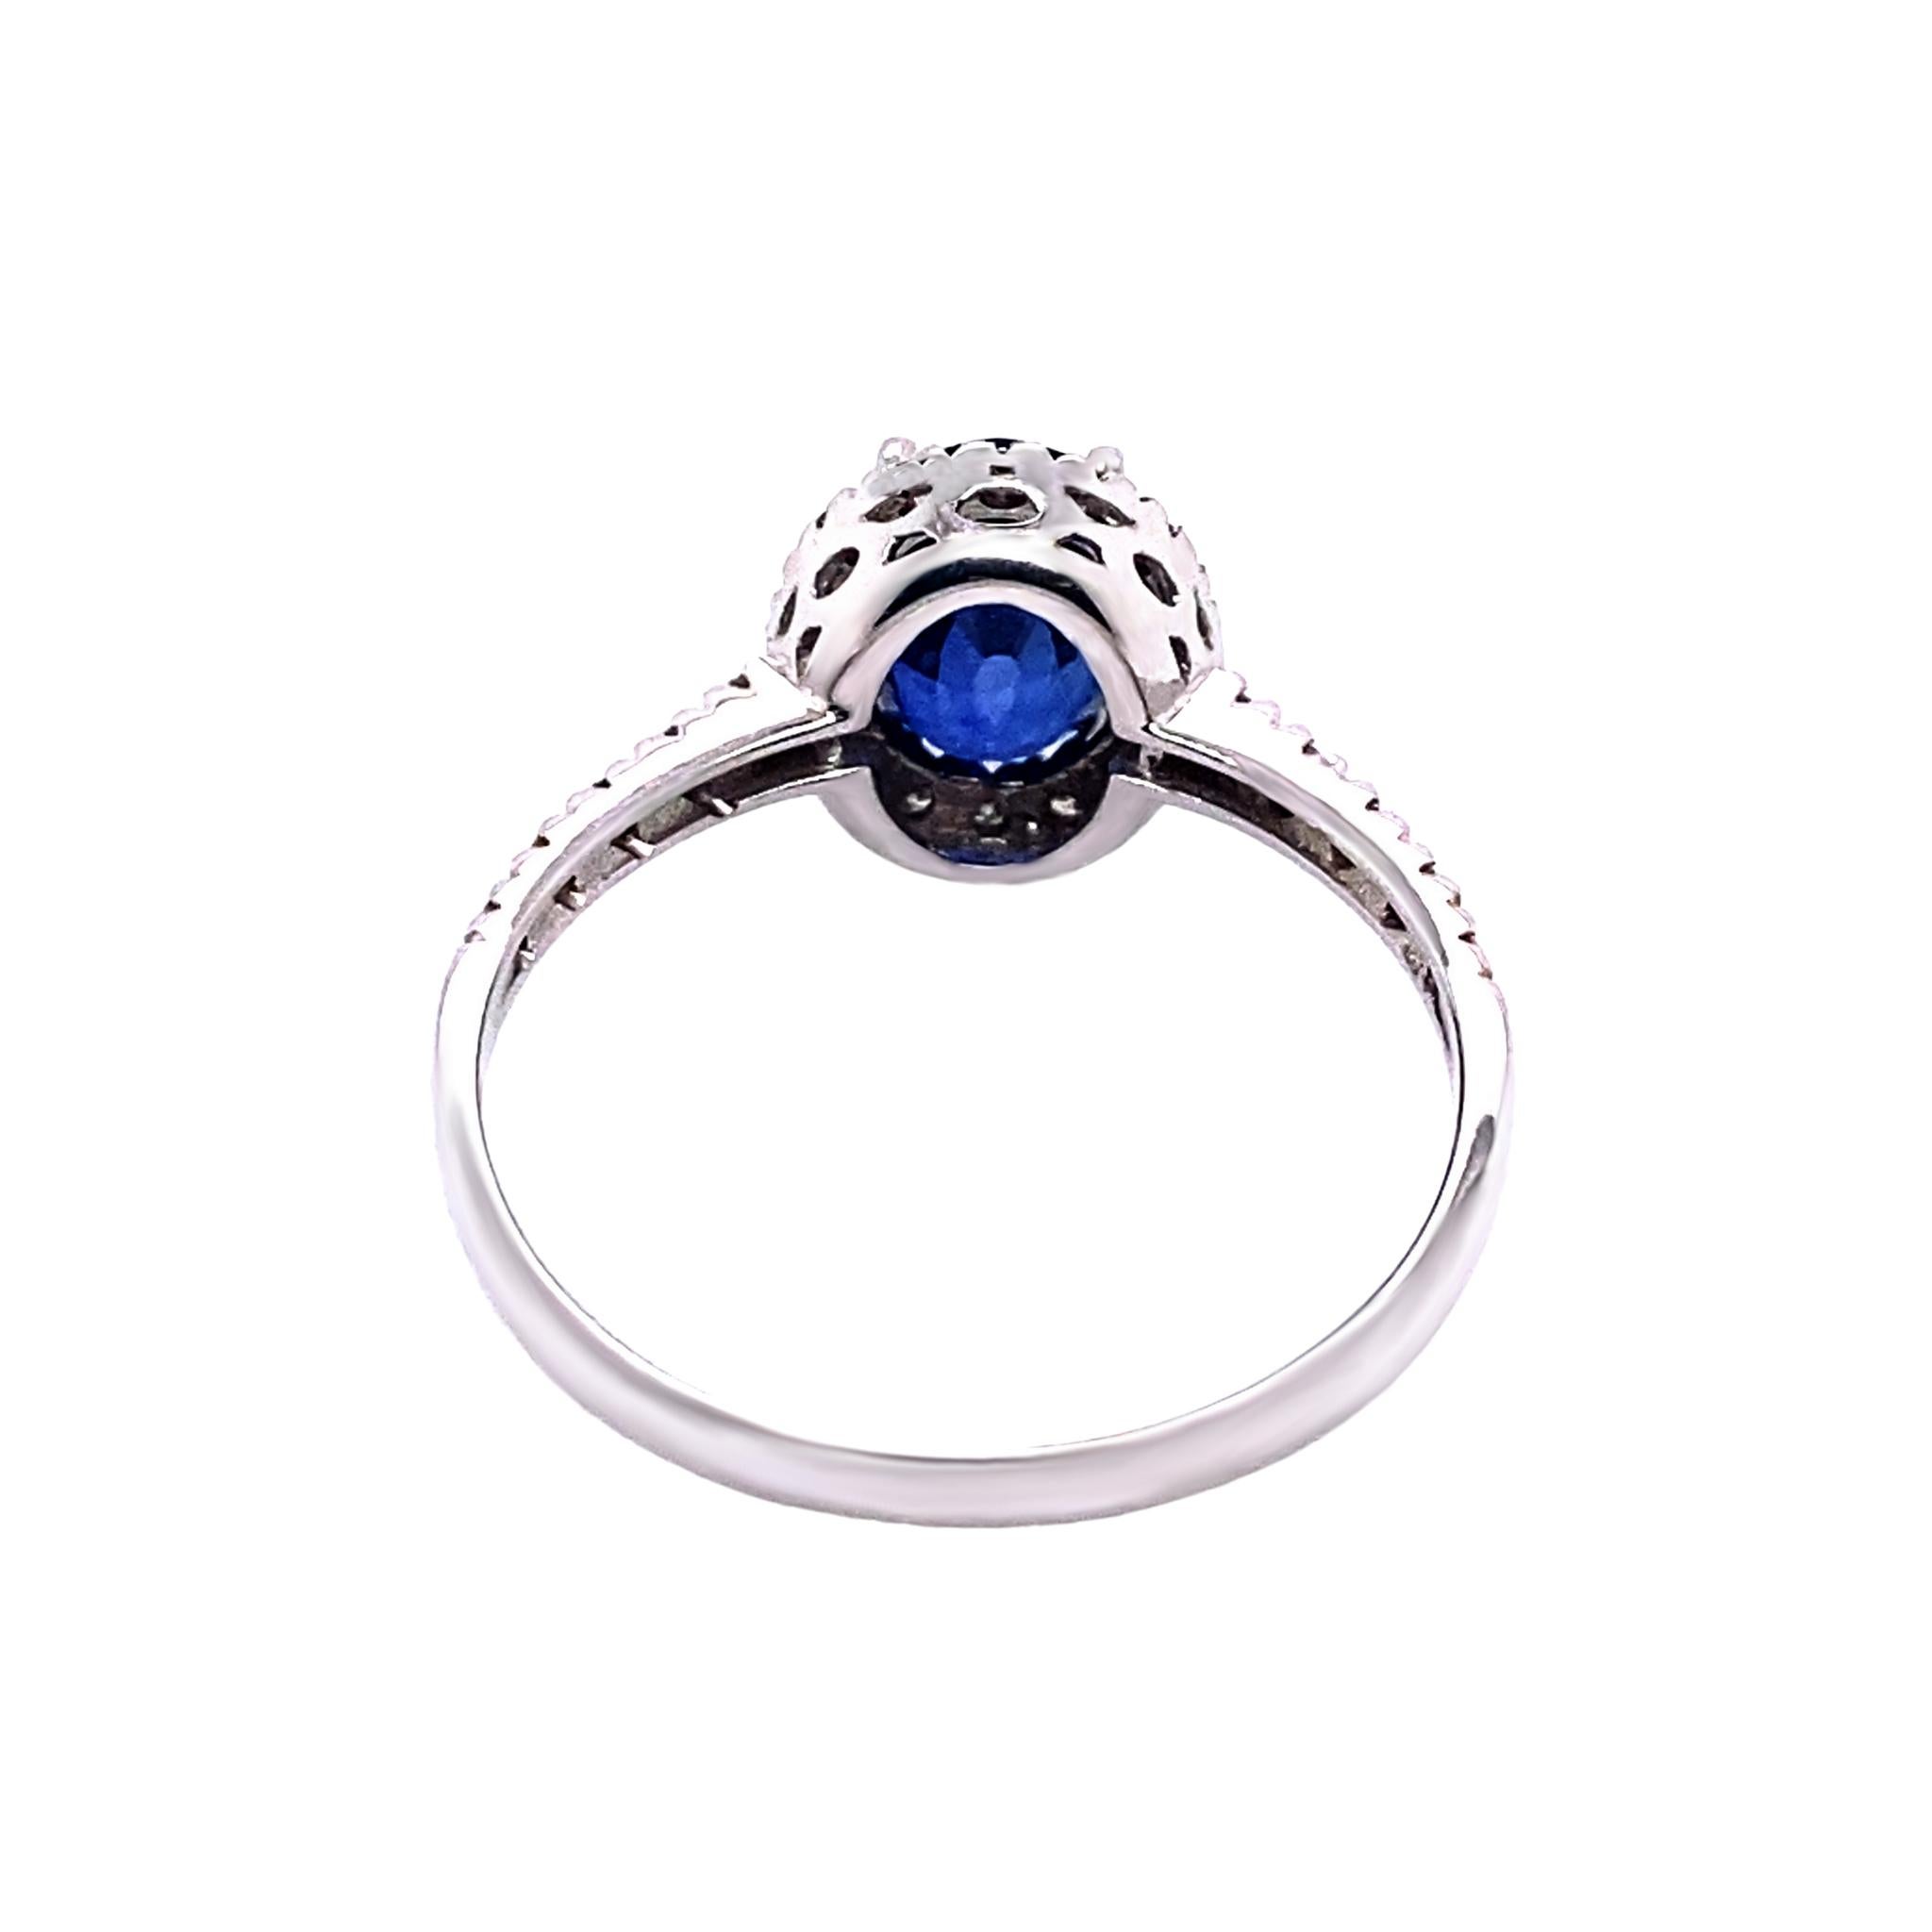 21st Century 18-Karat White Gold 1.51-Carat Blue Sapphire Diamond Cocktail Ring In New Condition For Sale In Palermo, Italy PA